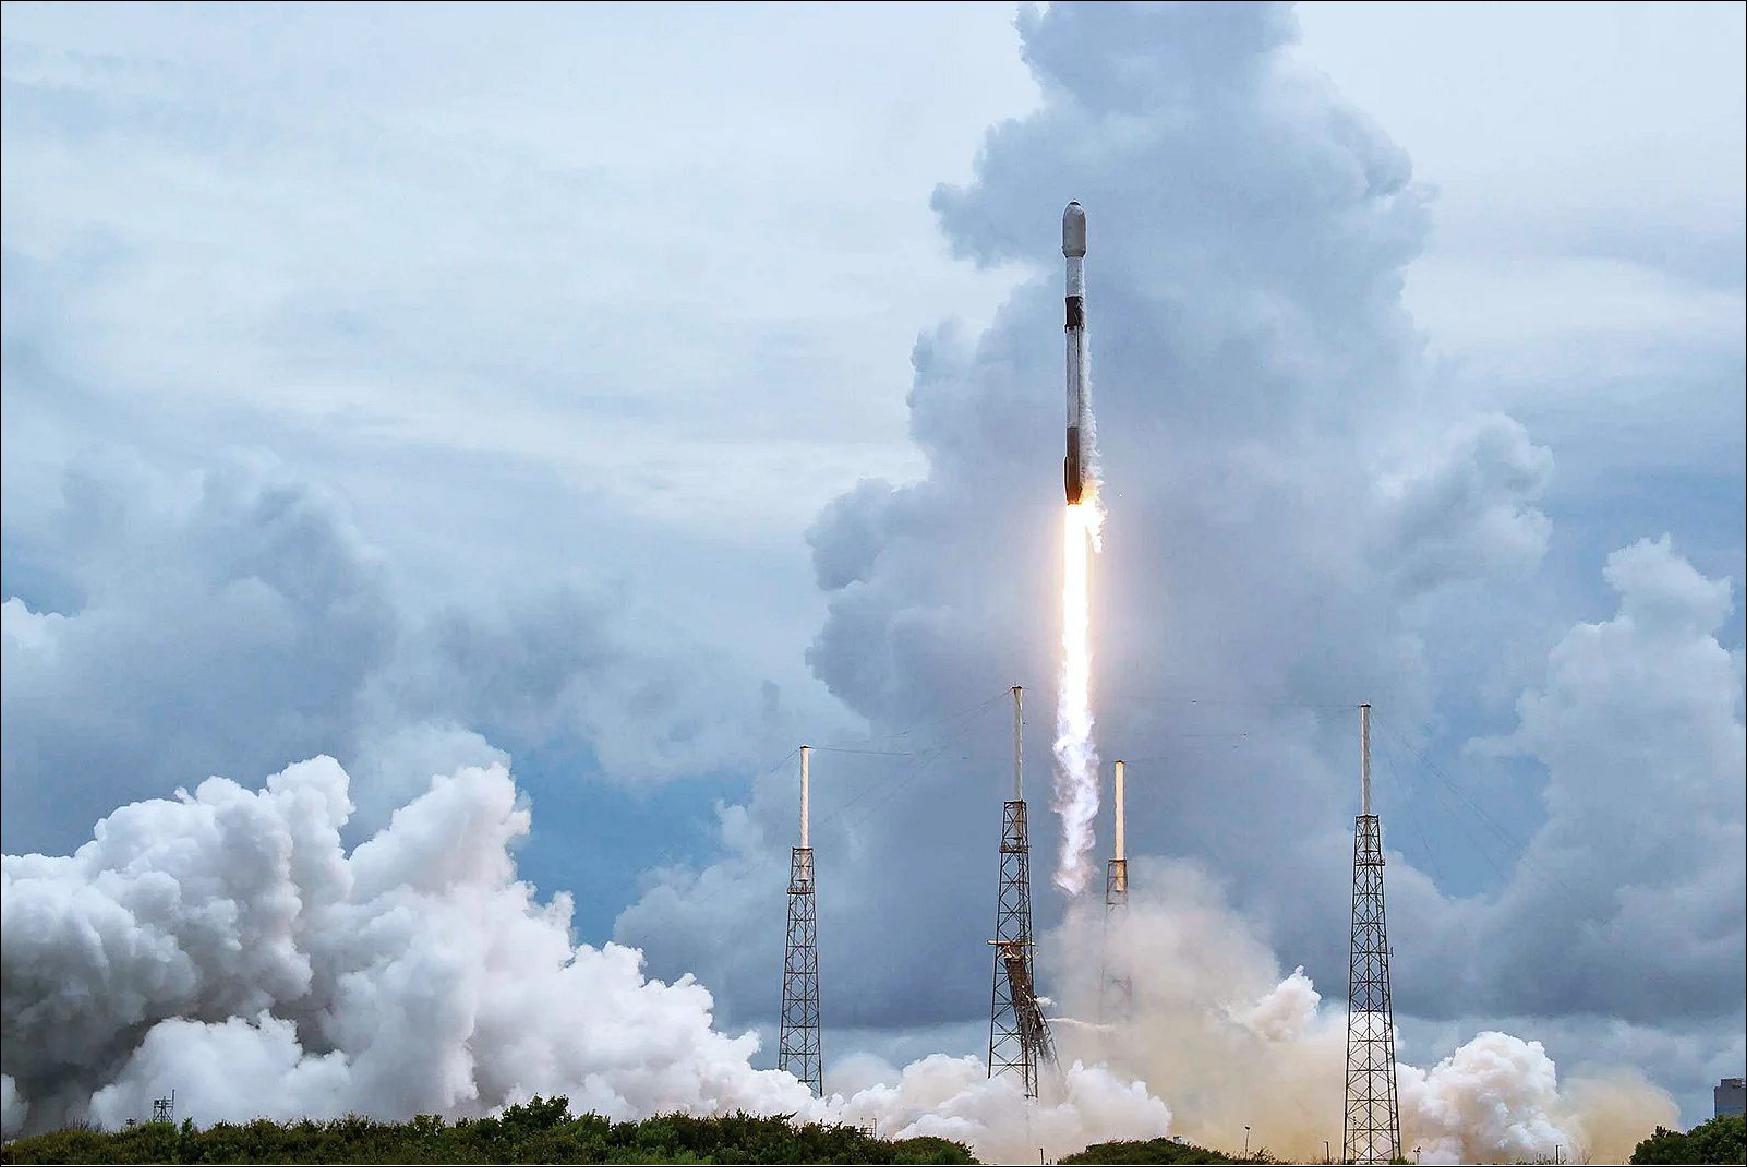 Figure 11: SpaceX Transporter-2 launch, 30 June 2021, carrying 4 ICEYE radar imaging satellites from Cape Canaveral Space Force Station, Florida. The deployment of the payload of 88 satellites started nearly 58 minutes after liftoff, once the upper stage performed a second burn of its engine to place it into a sun-synchronous orbit at an altitude of nearly 550 km (image credit: SpaceX via Exolaunch)